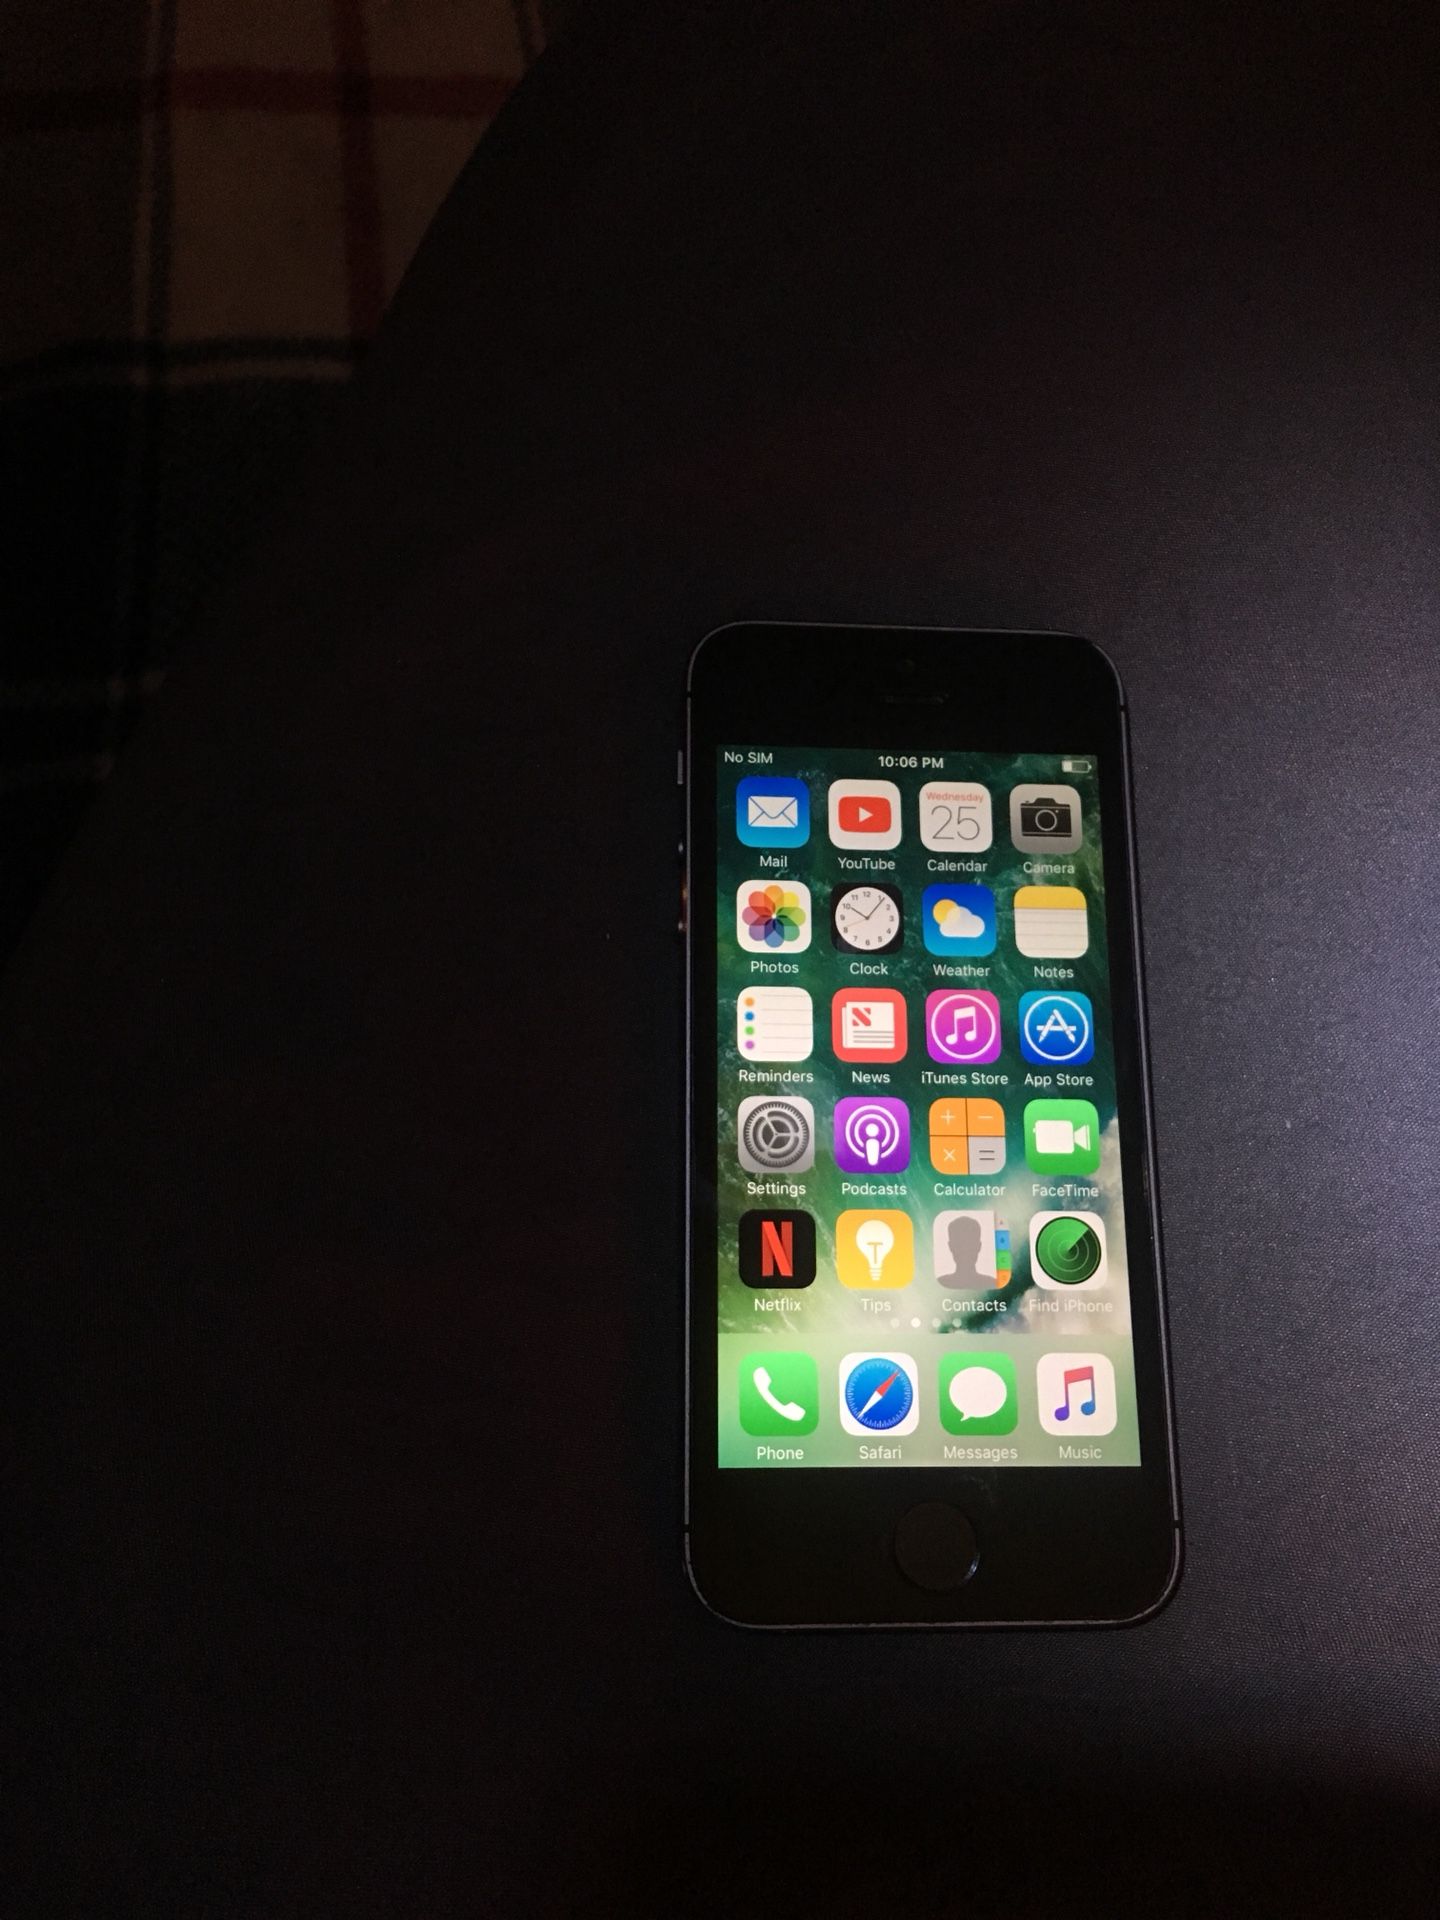 Iphone 5 for sale in perfecf condition unlocked